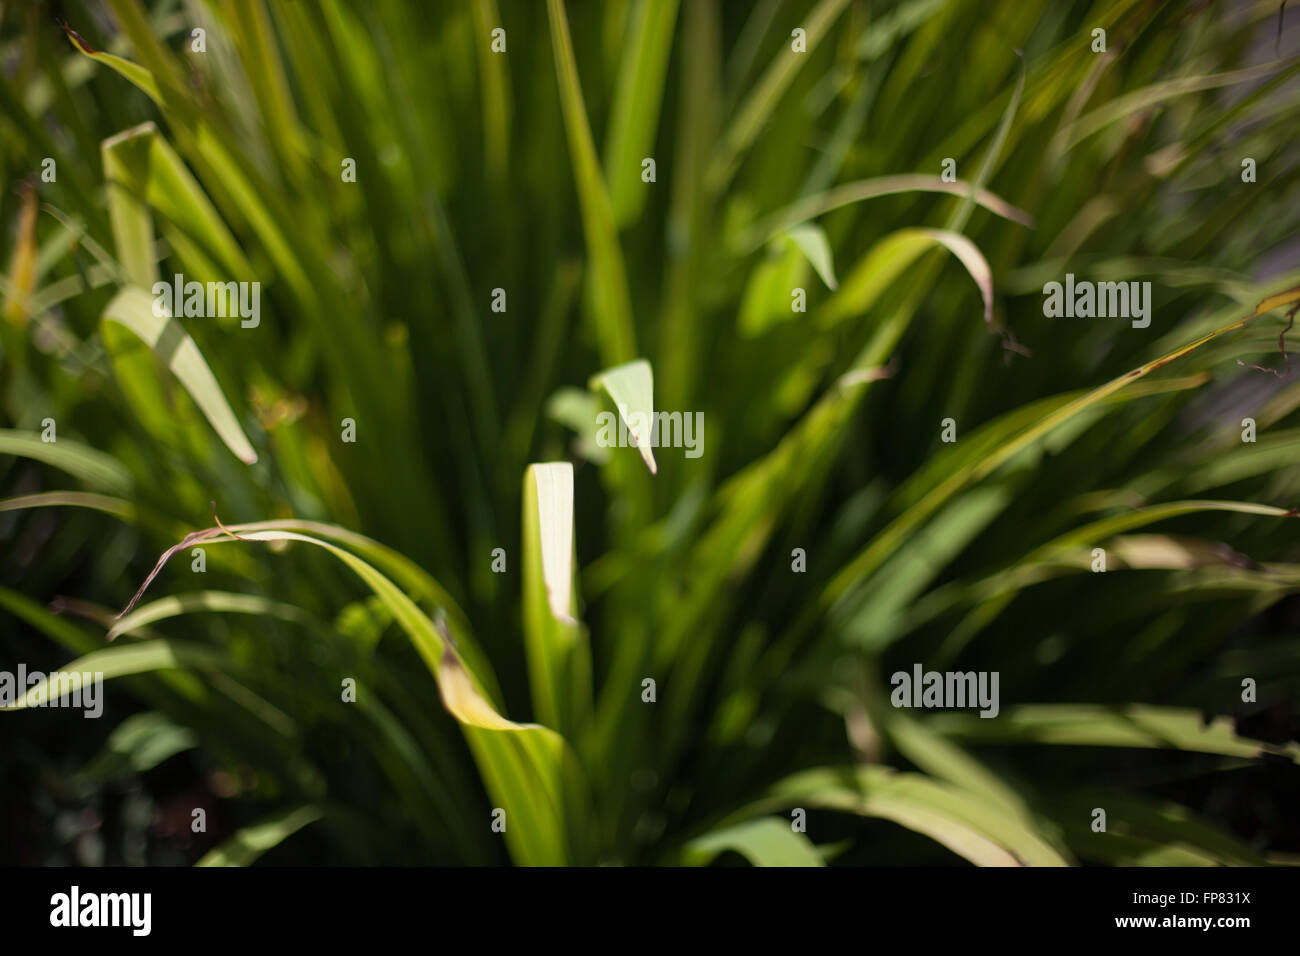 Full Frame Shot Of Plants Growing Outdoors Stock Photo